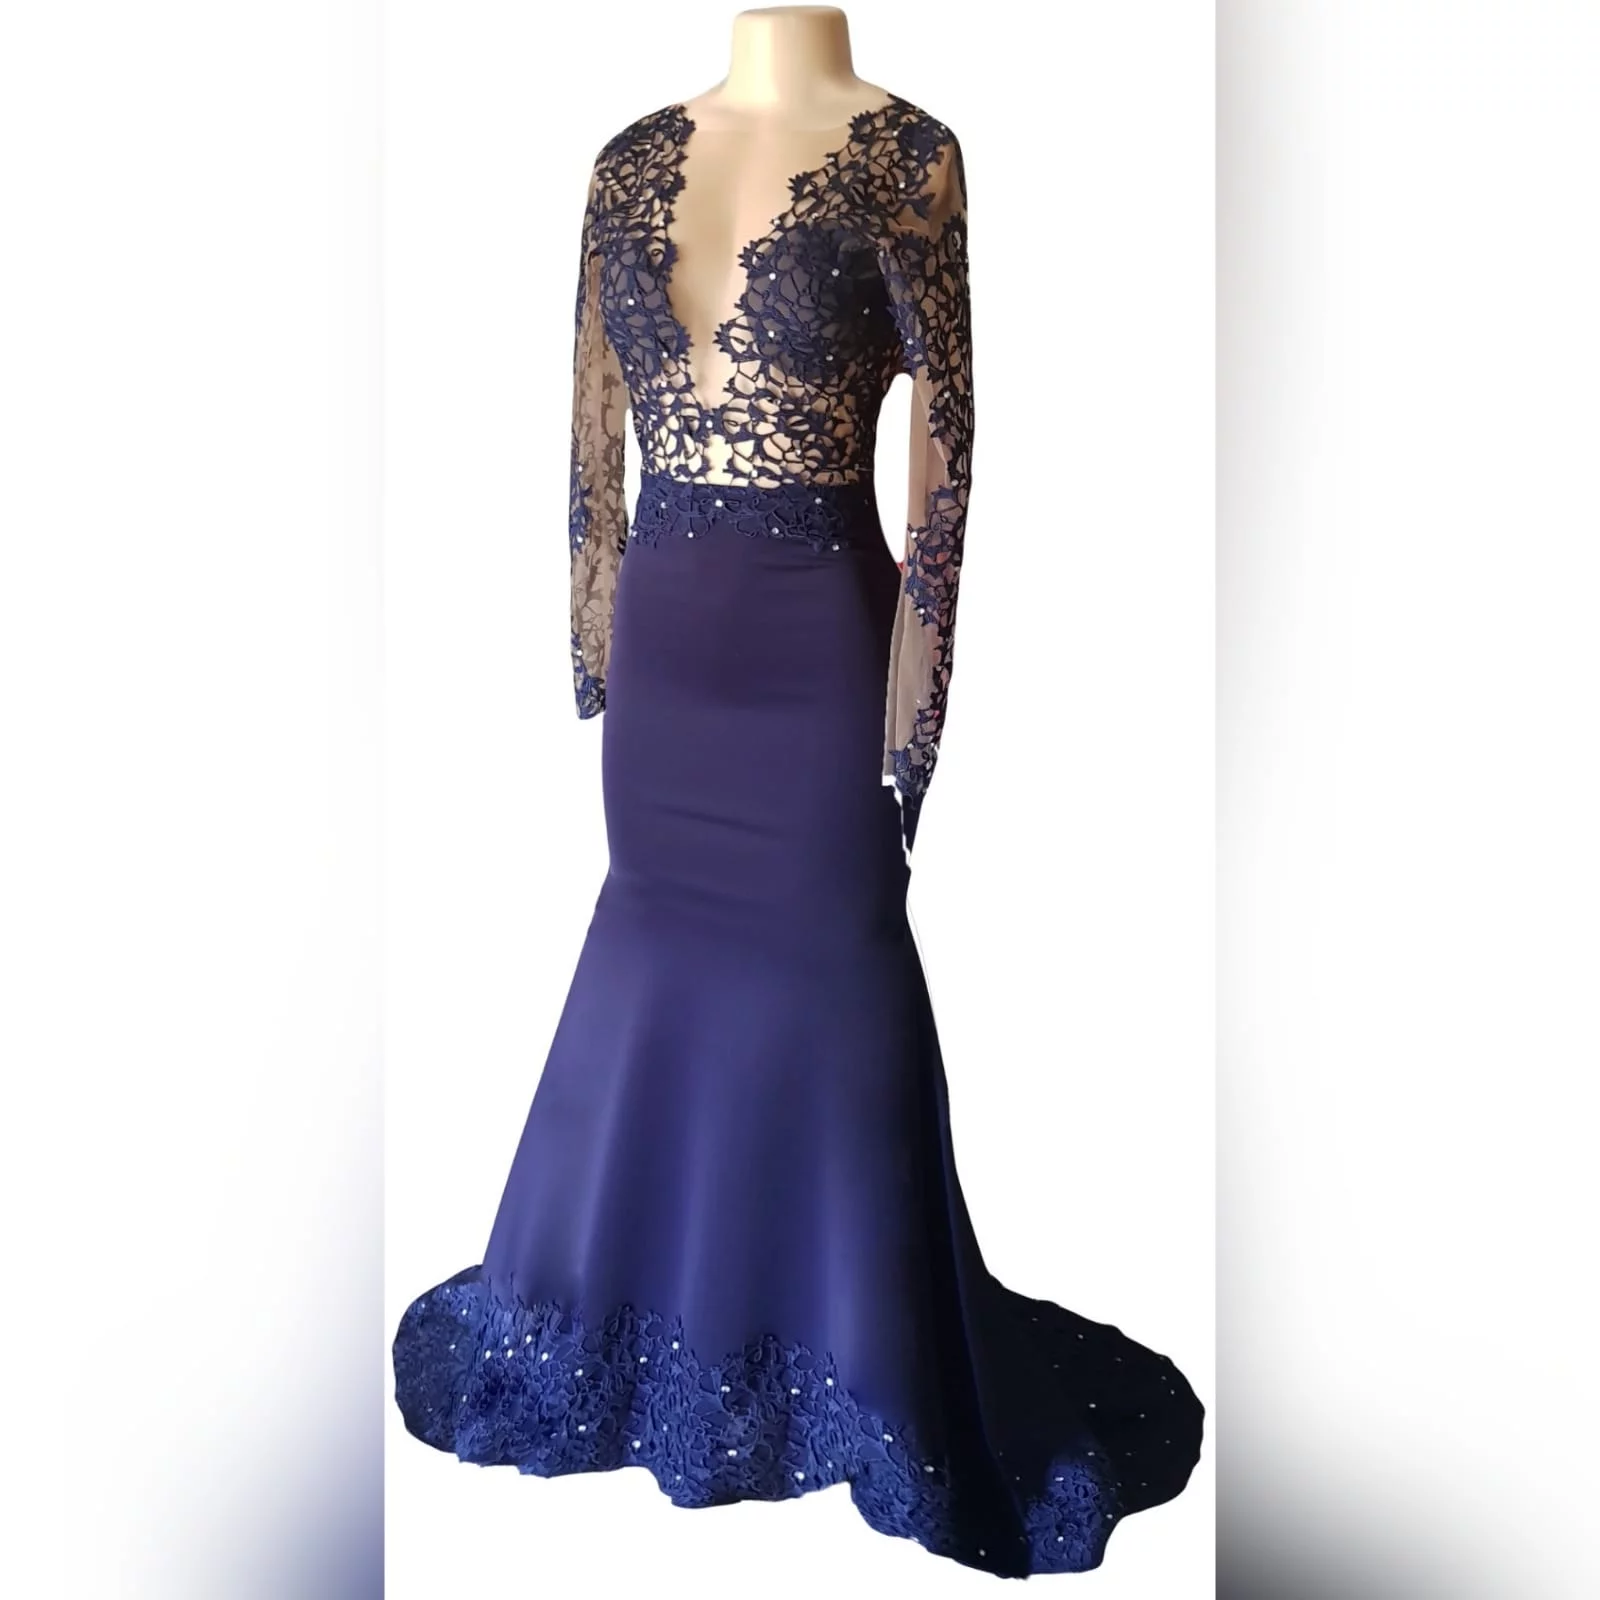 Custom-designed navy blue mermaid prom dress 8 <em>"a girl should be two things: who and what she wants. "</em> <em>coco chanel</em> looking stunning on her prom night, she wore a custom-designed and made the dress to fit her like a glove. This navy blue mermaid prom dress has a sheer lace bodice and sleeves, a lace border and scattered silver beads. A dramatic train and a v open back.